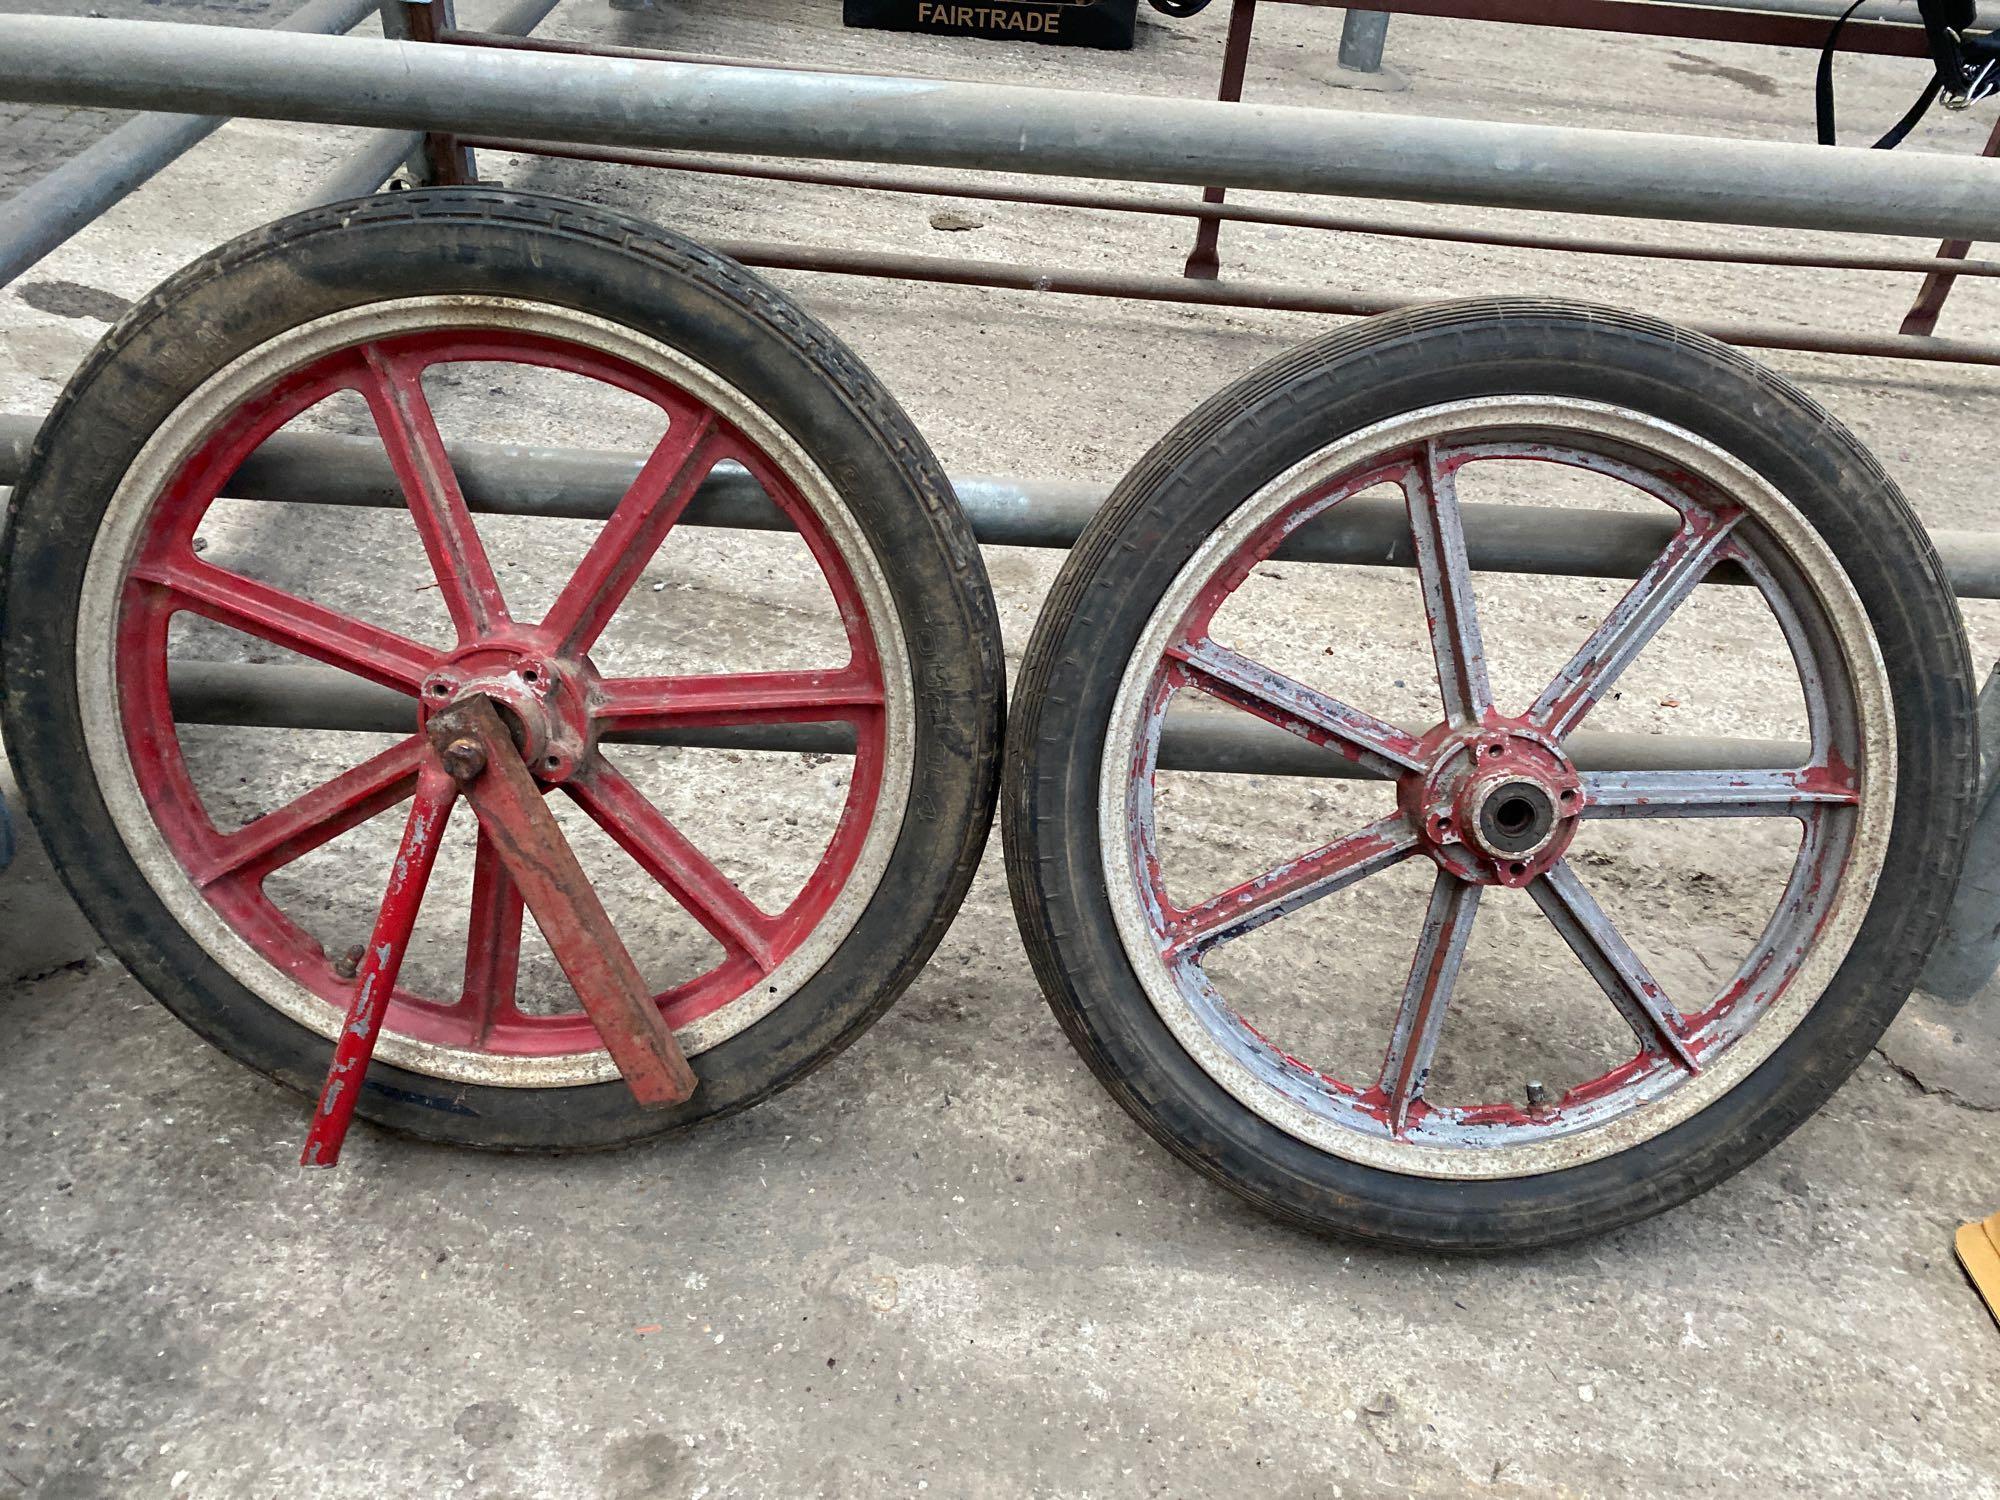 A pair of 7 spoke aluminium wheels with pneumatic tyres